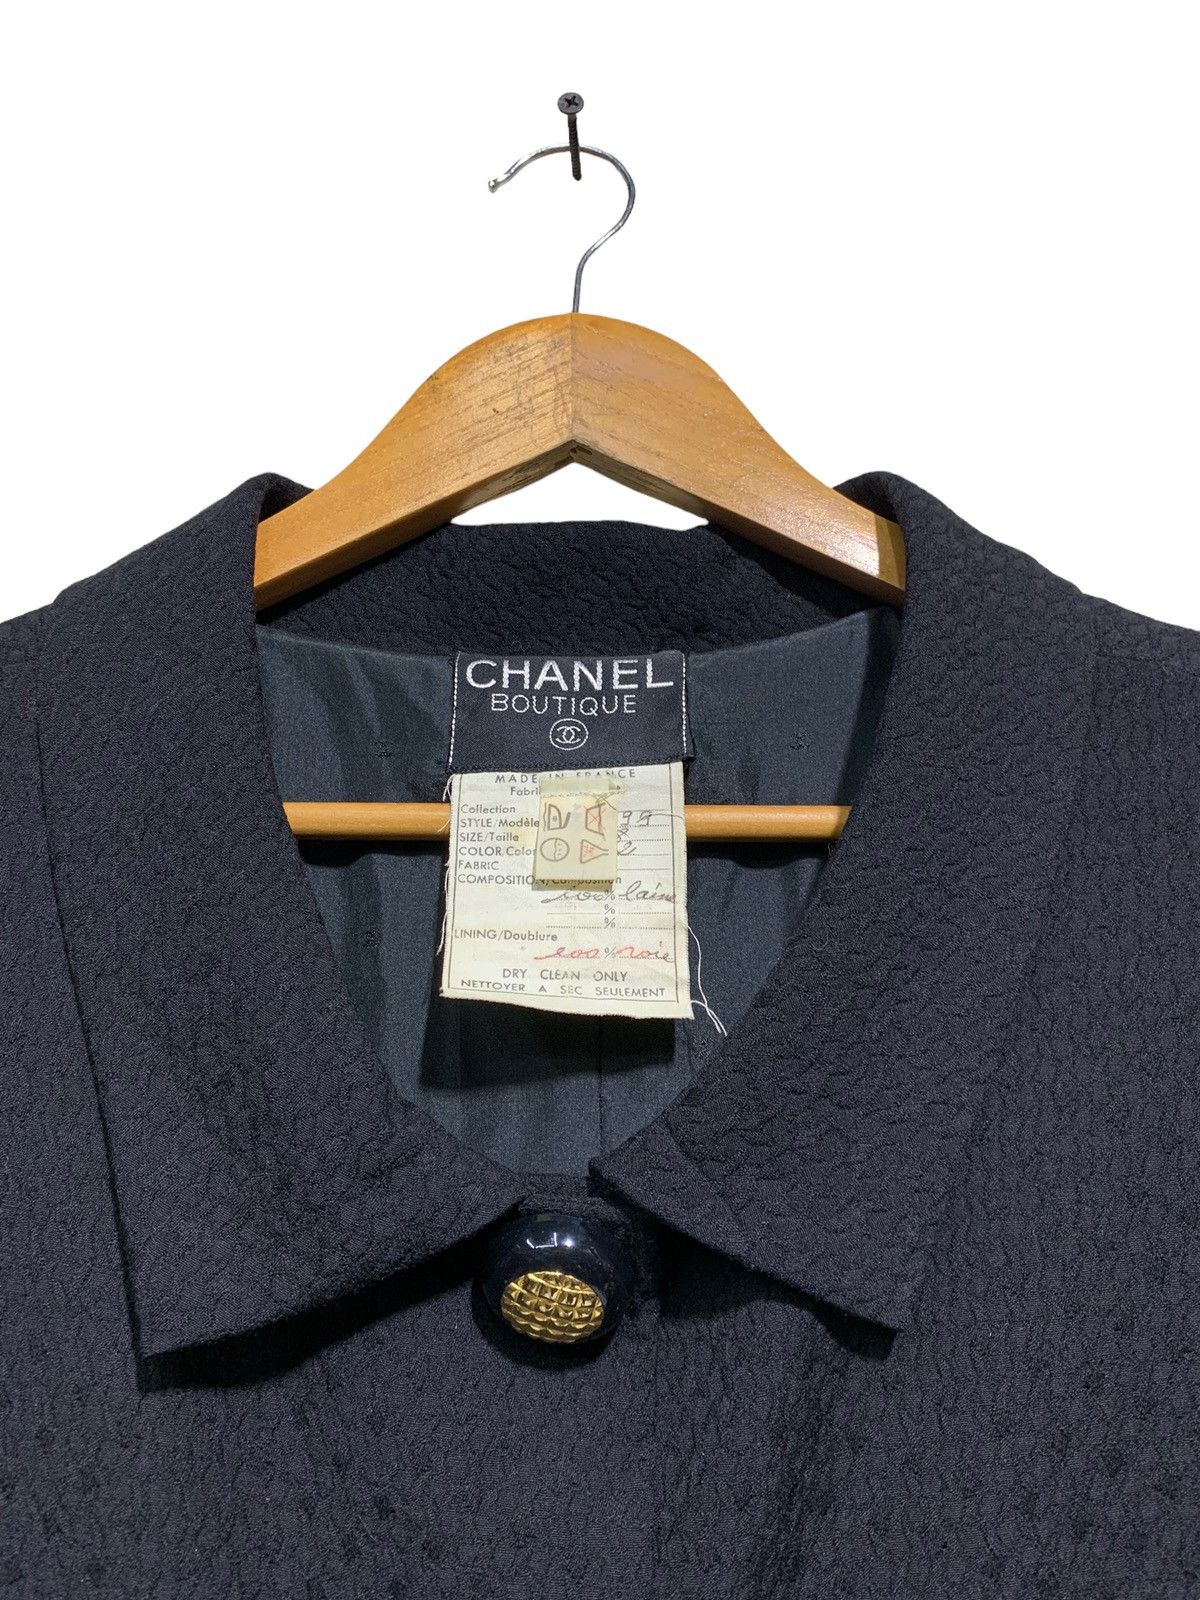 🔥AUTHENTIC CHANEL WOOL SUITS JACKETS - 4